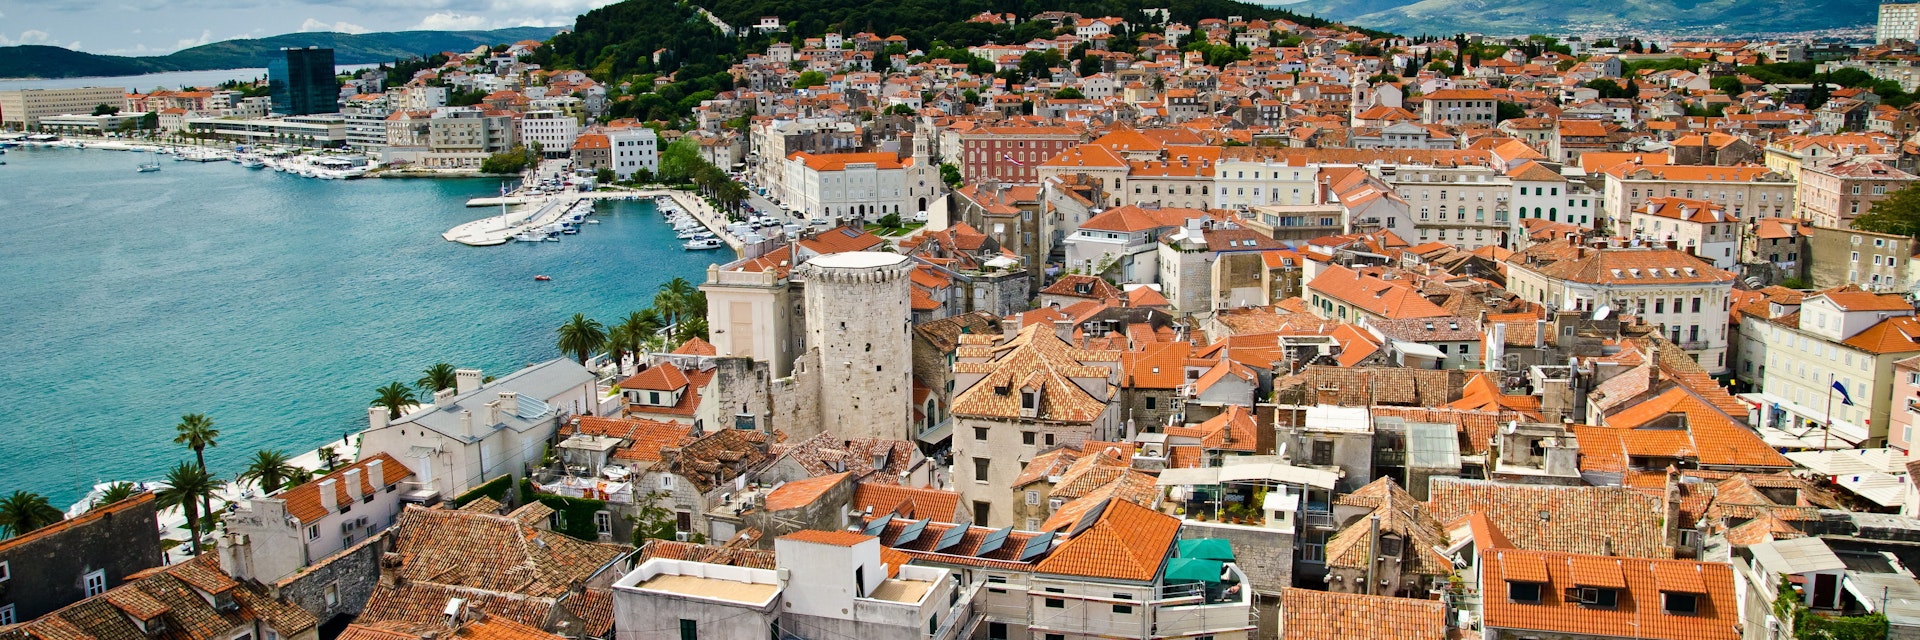 Aerial view of Split's historic Diocletian's Palace, Old Town and Marjan hill.
